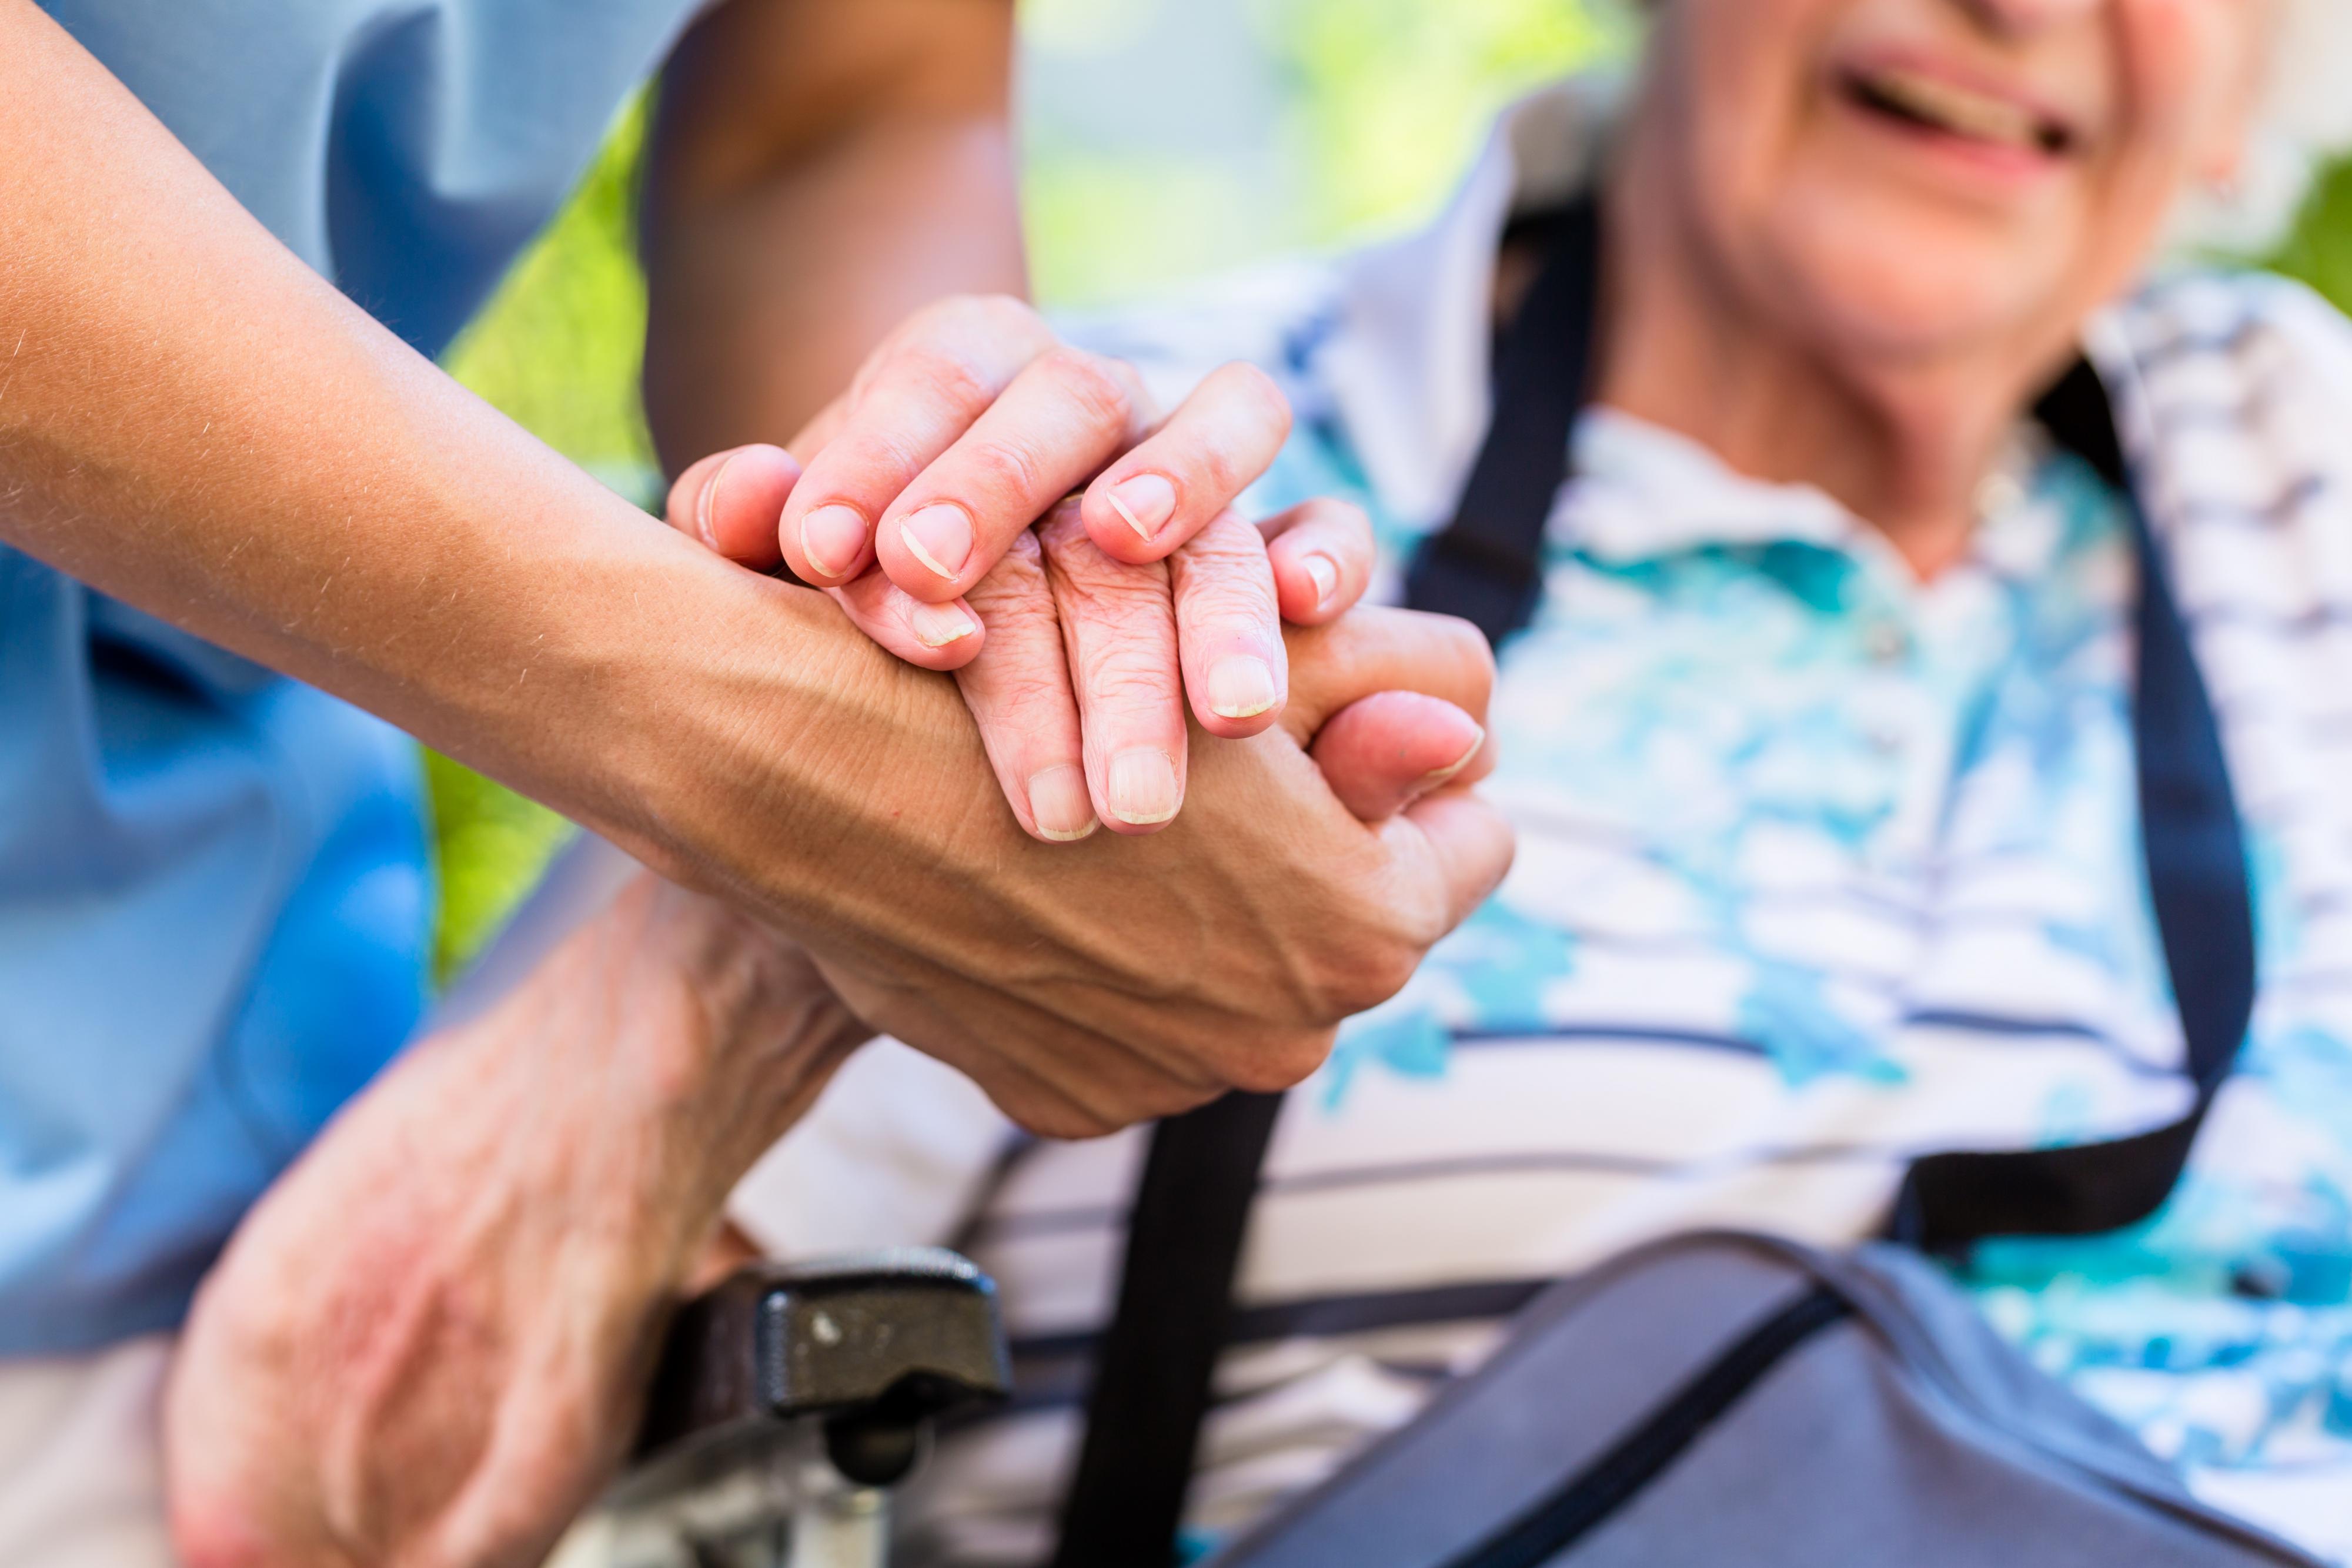 young person holding the hands of older person